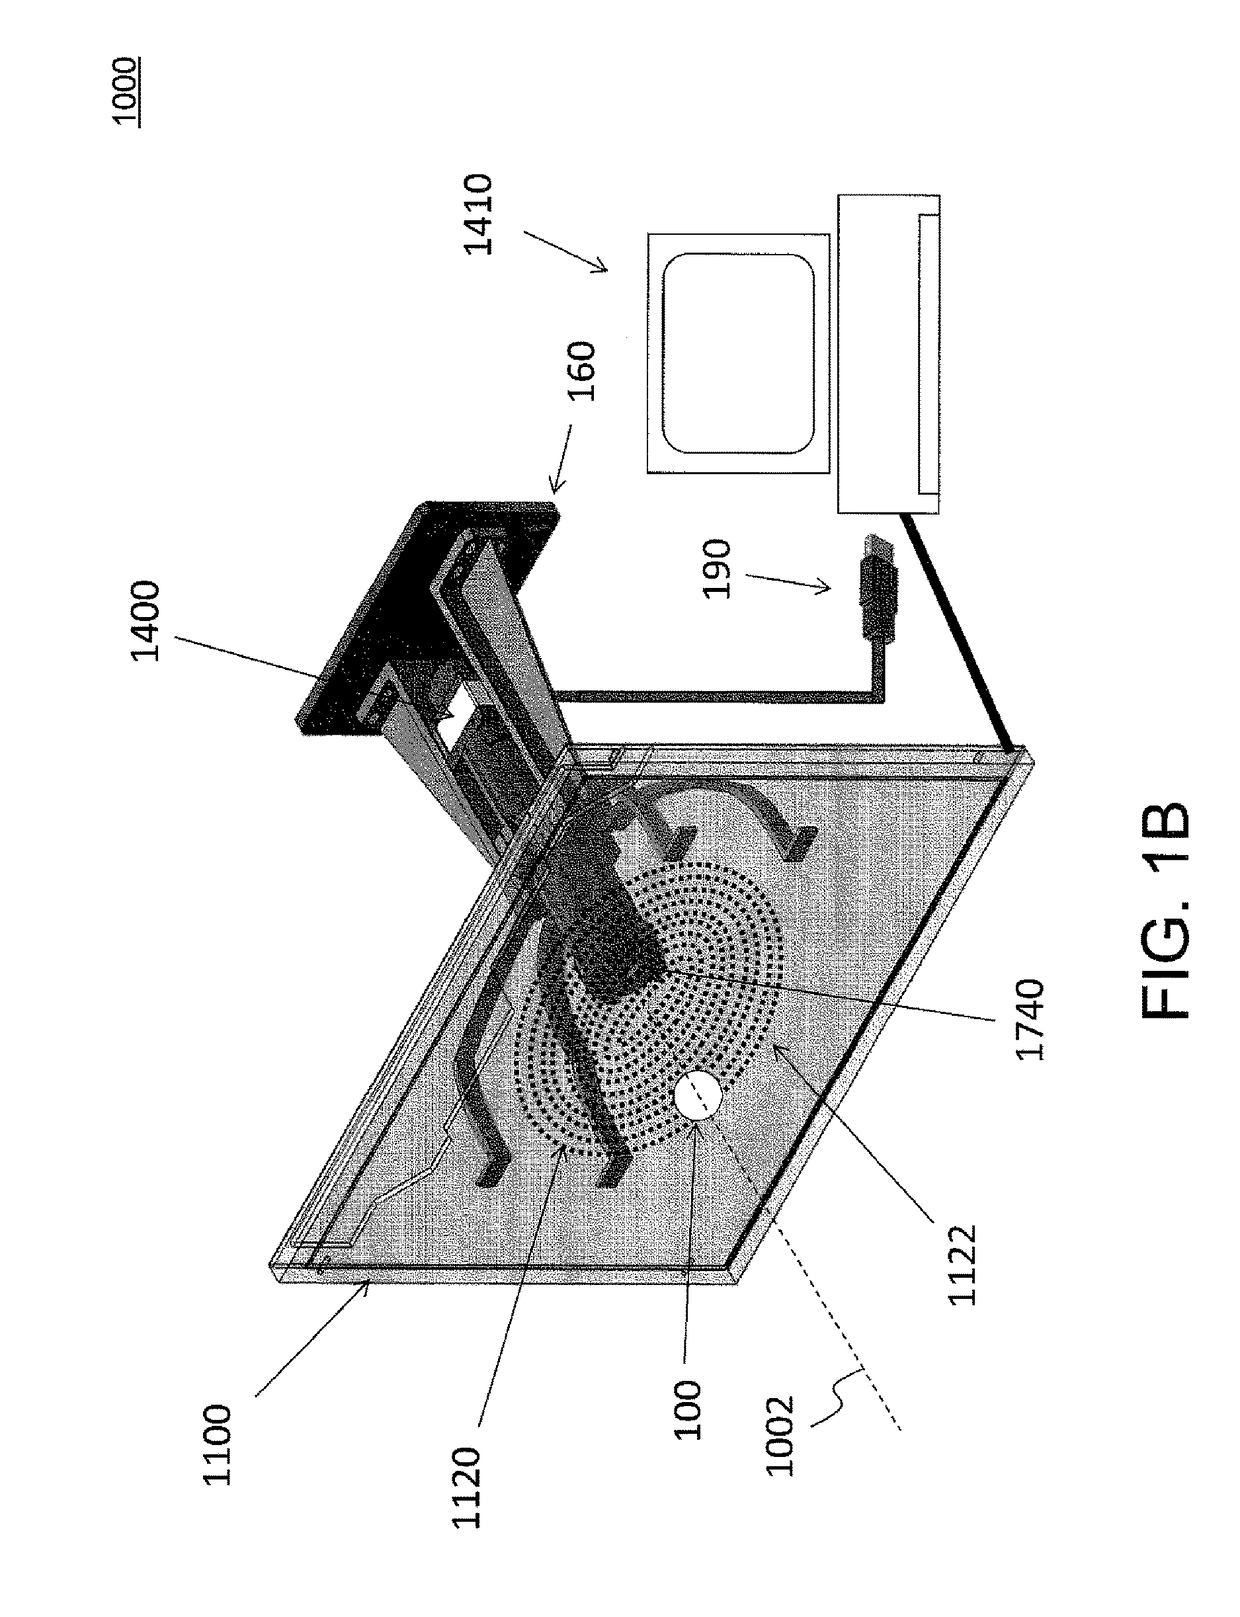 System and method for corneal topography with flat panel display